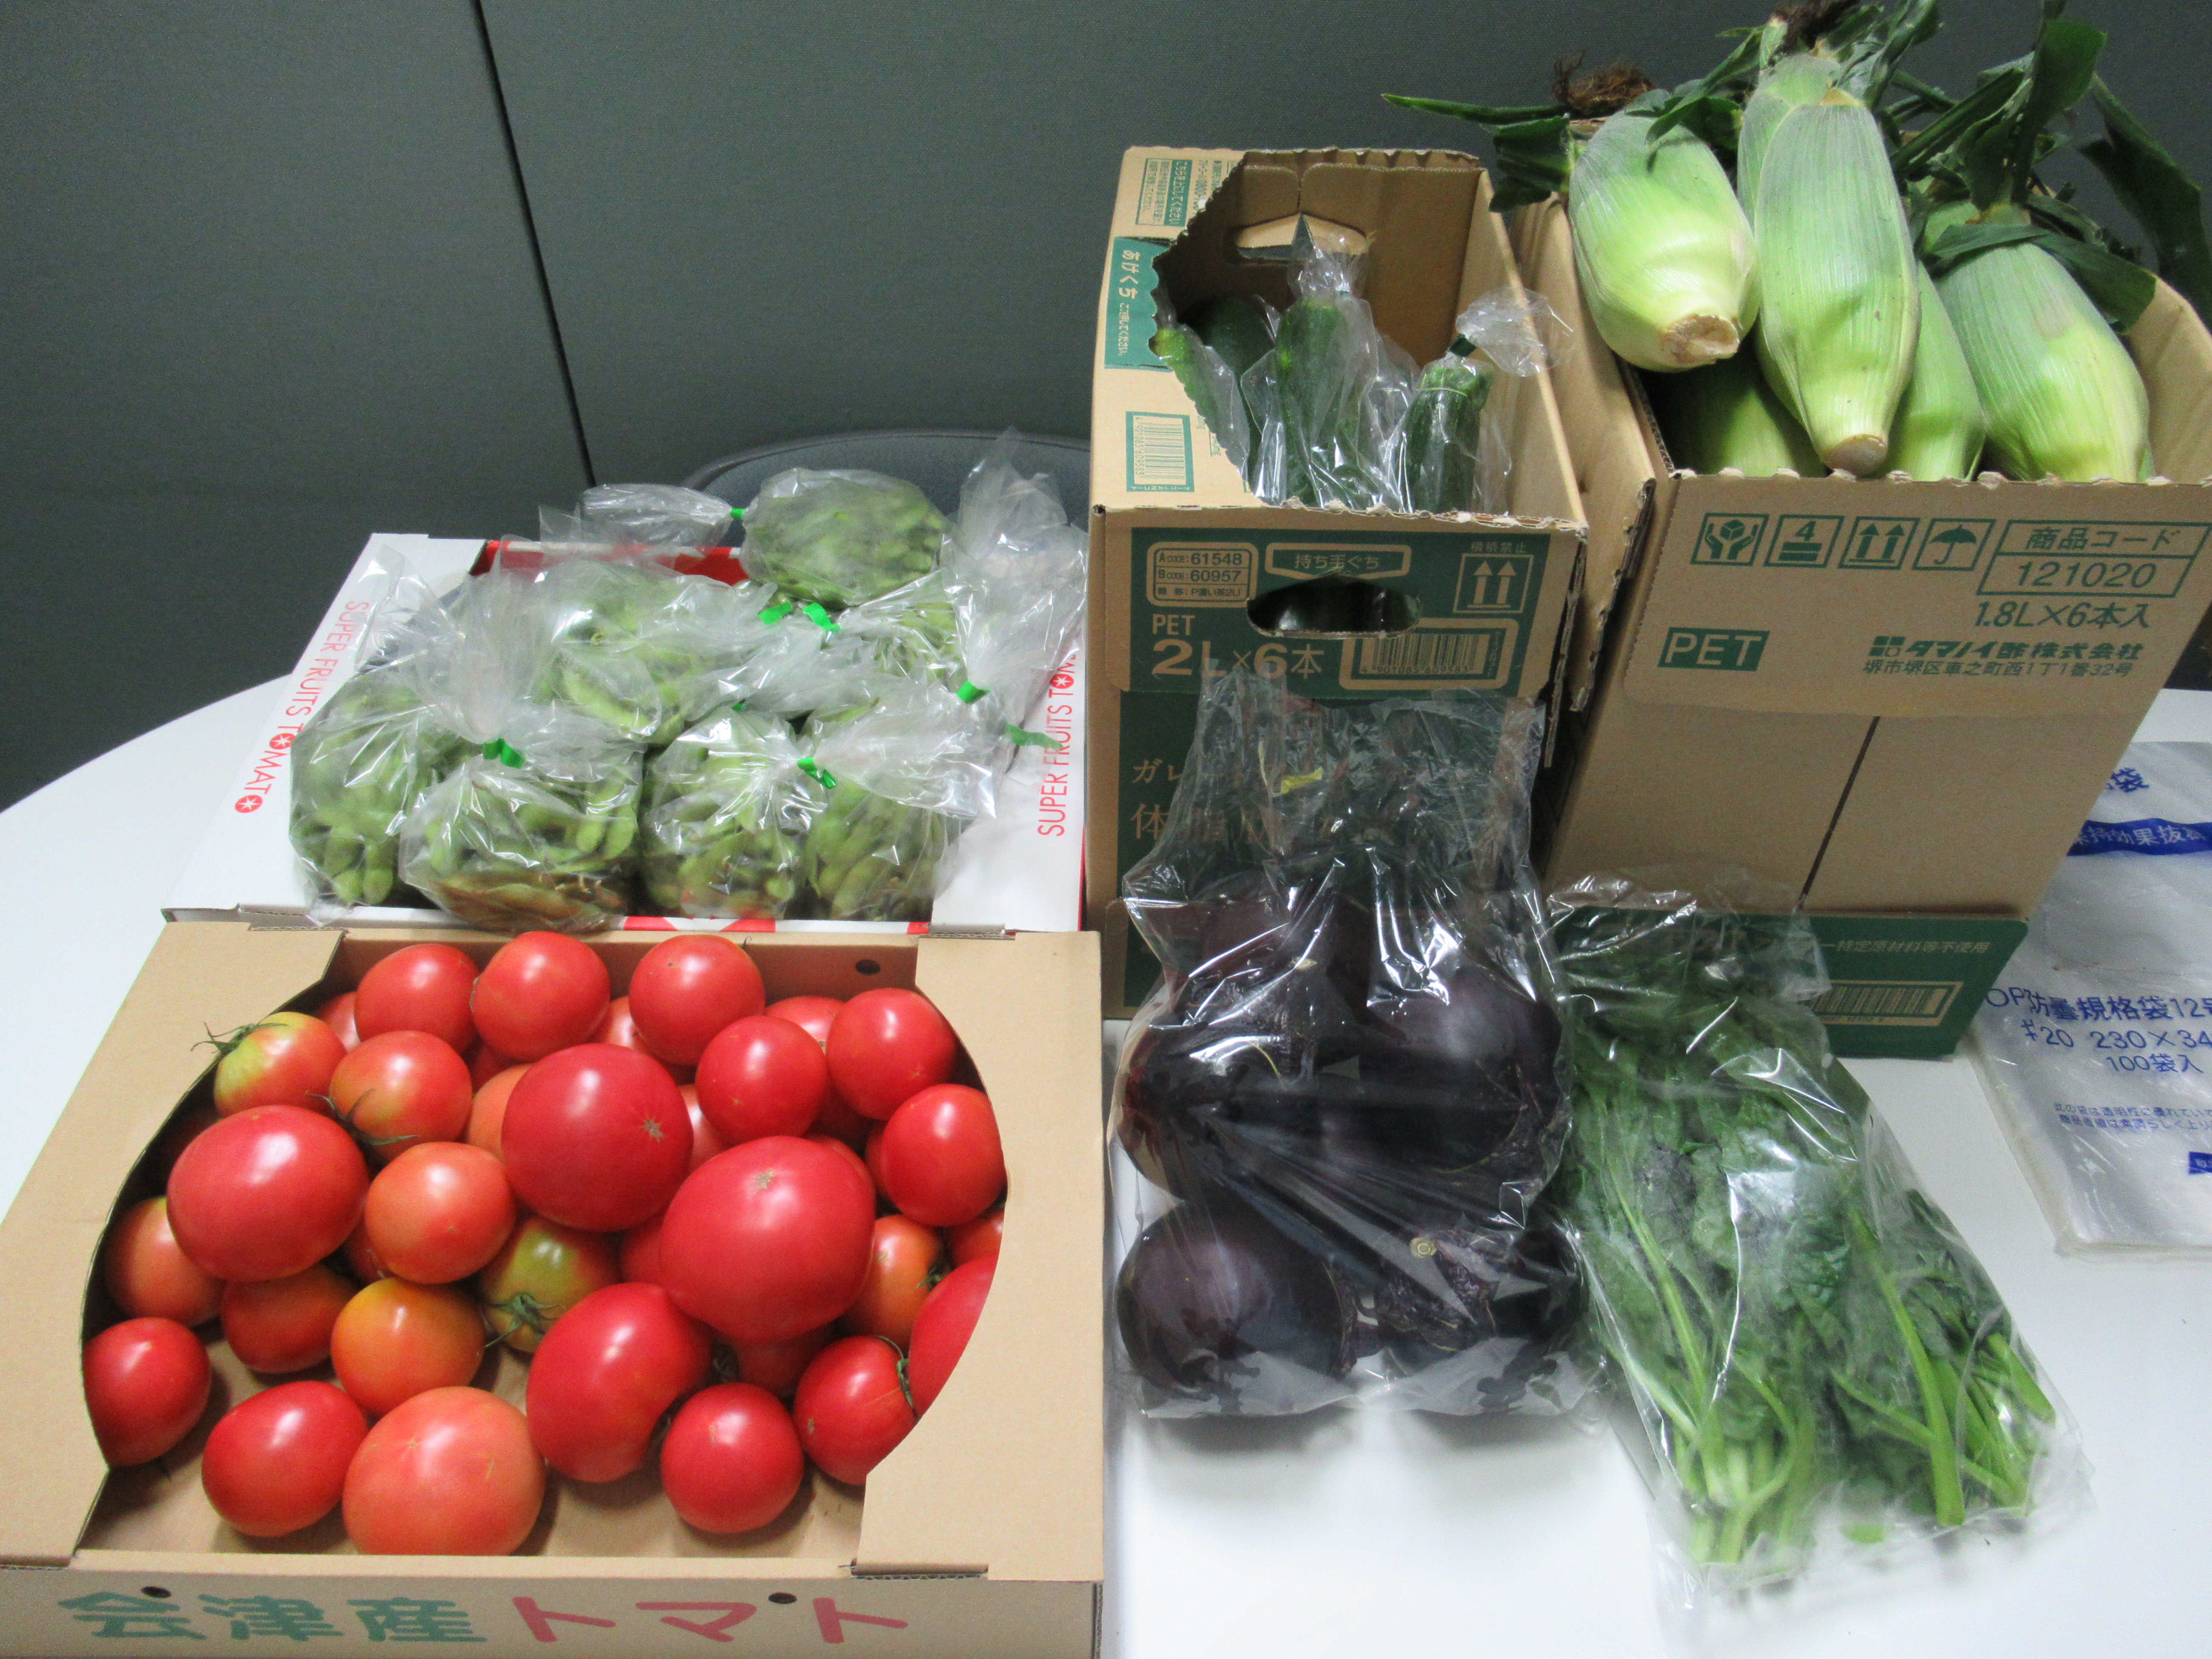 MS. Takahashi donated vegetables (tomato, corn, zucchini, eggplant and green soybeans) to the international students